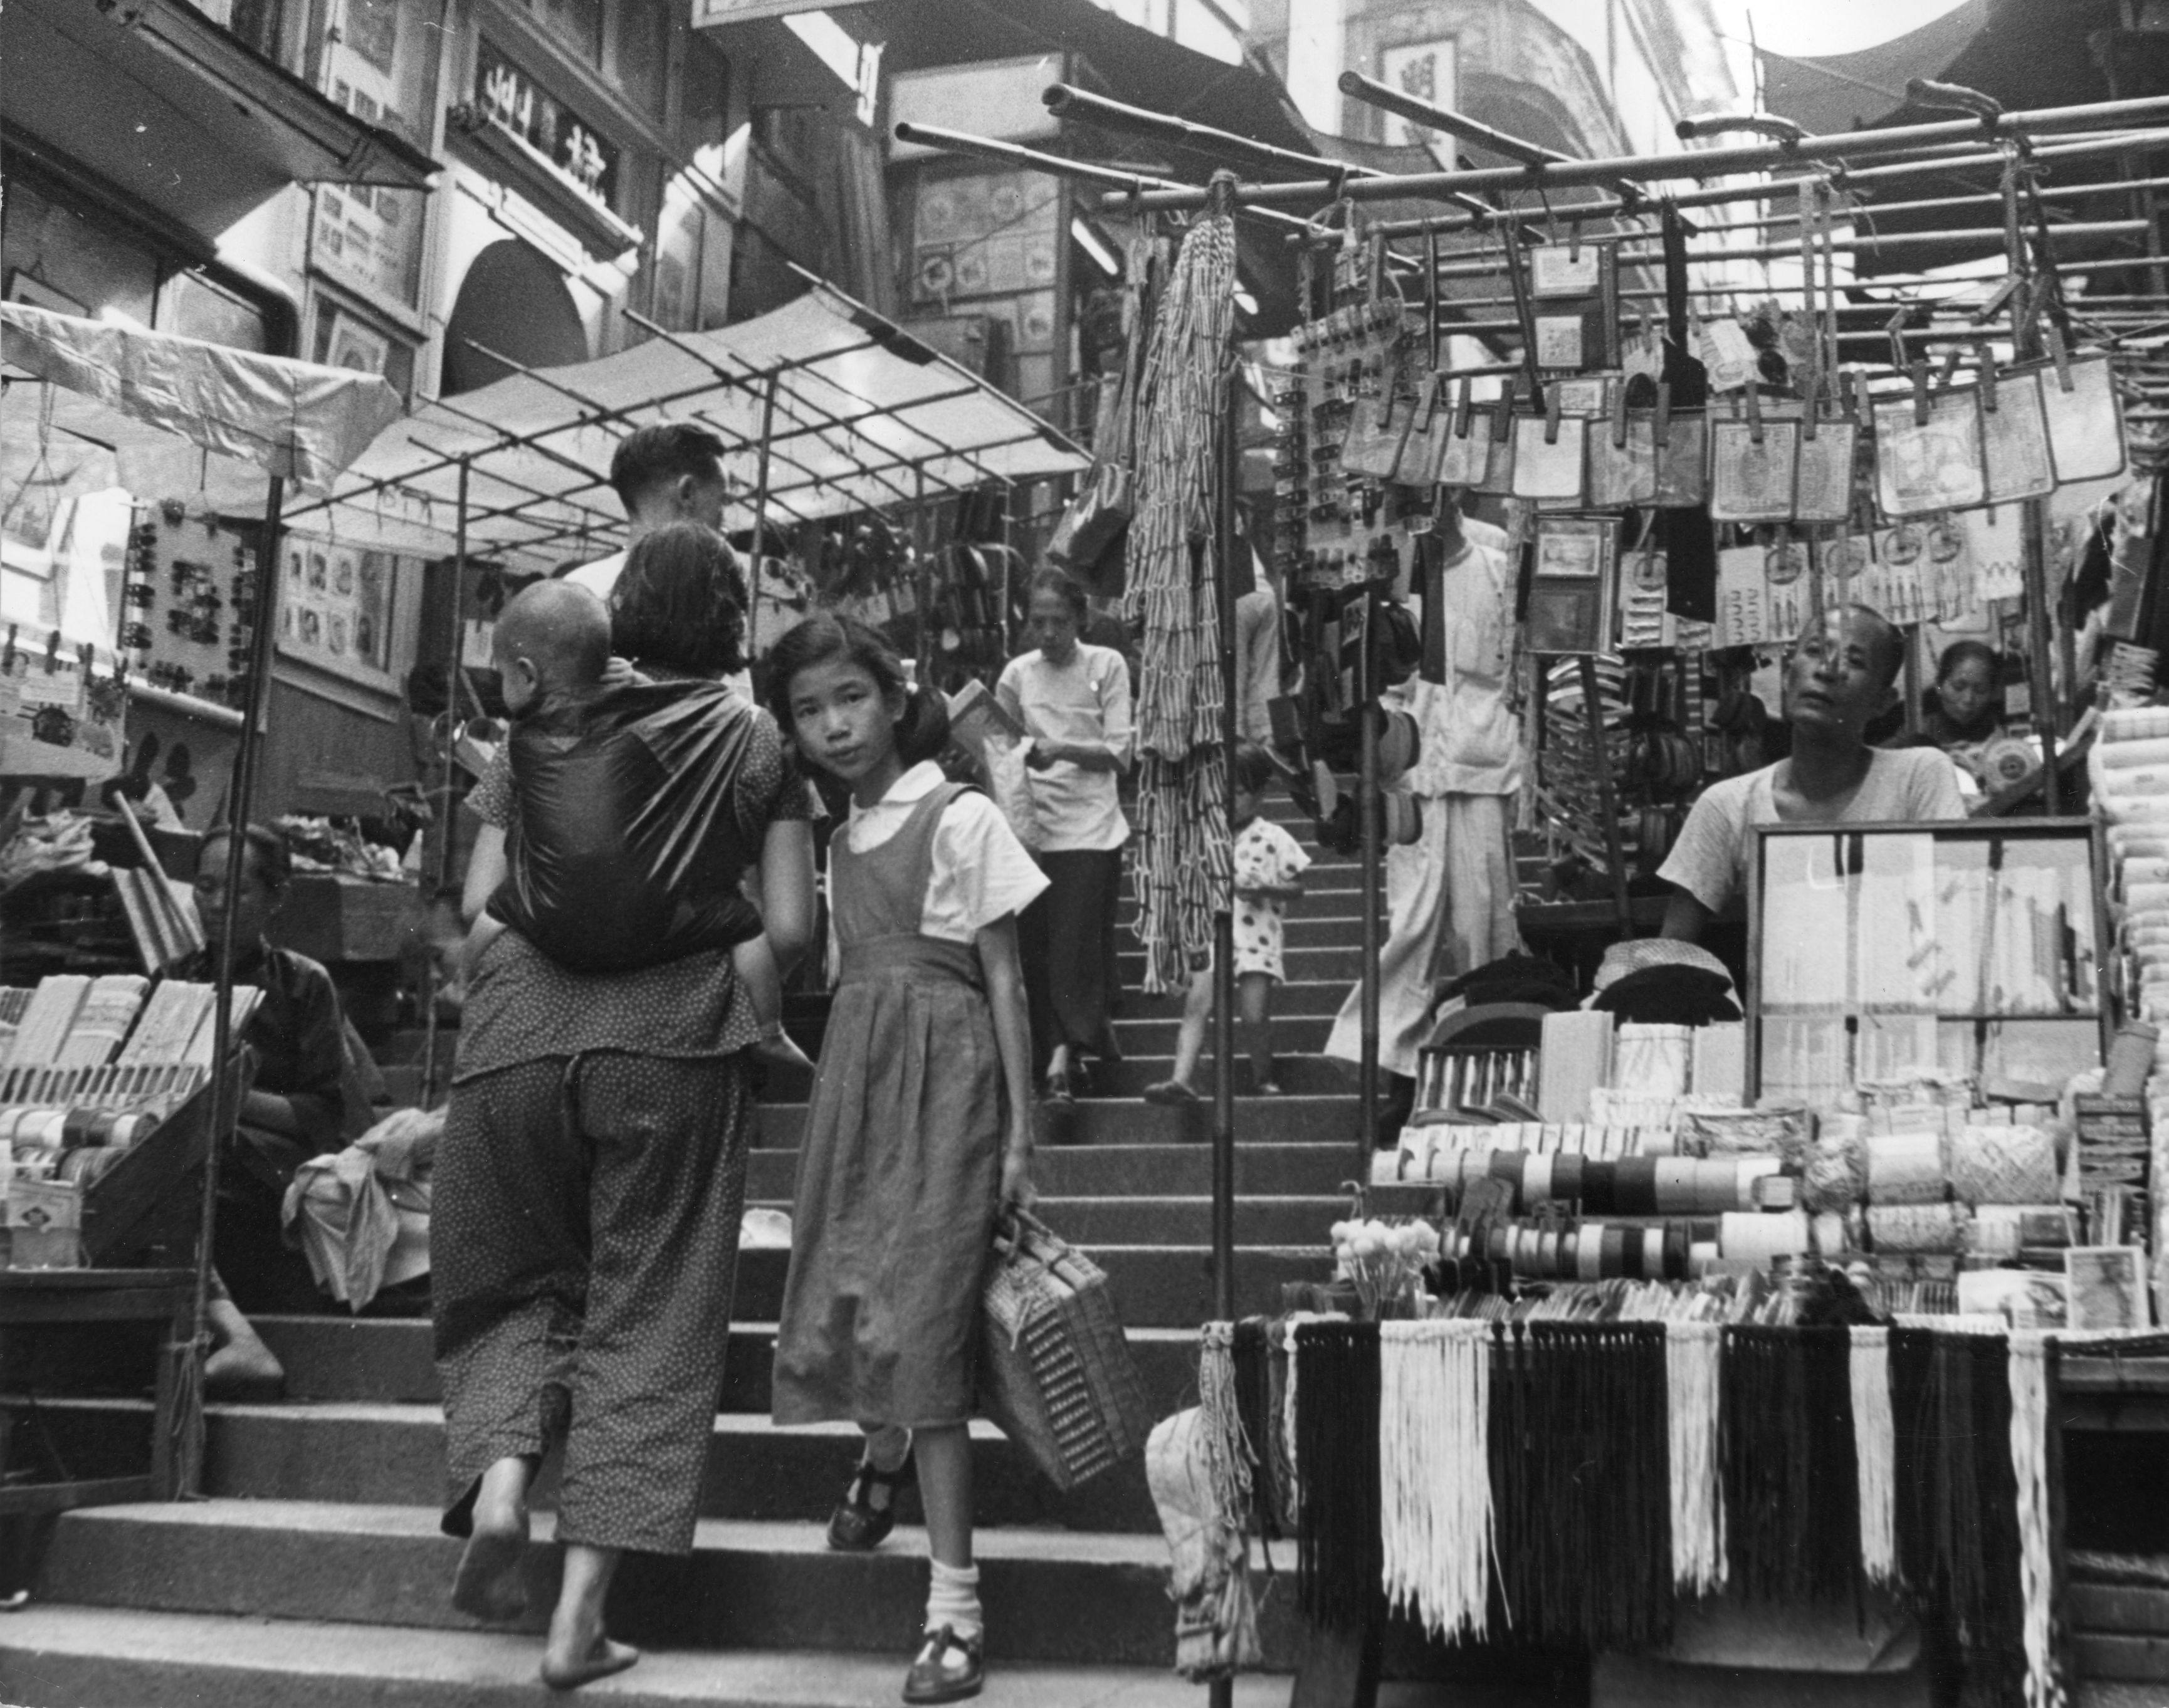 Hong Kong’s most comprehensive historical book was published back in 1957. Above: street traders in Central, Hong Kong circa 1950. Photo: Getty Images